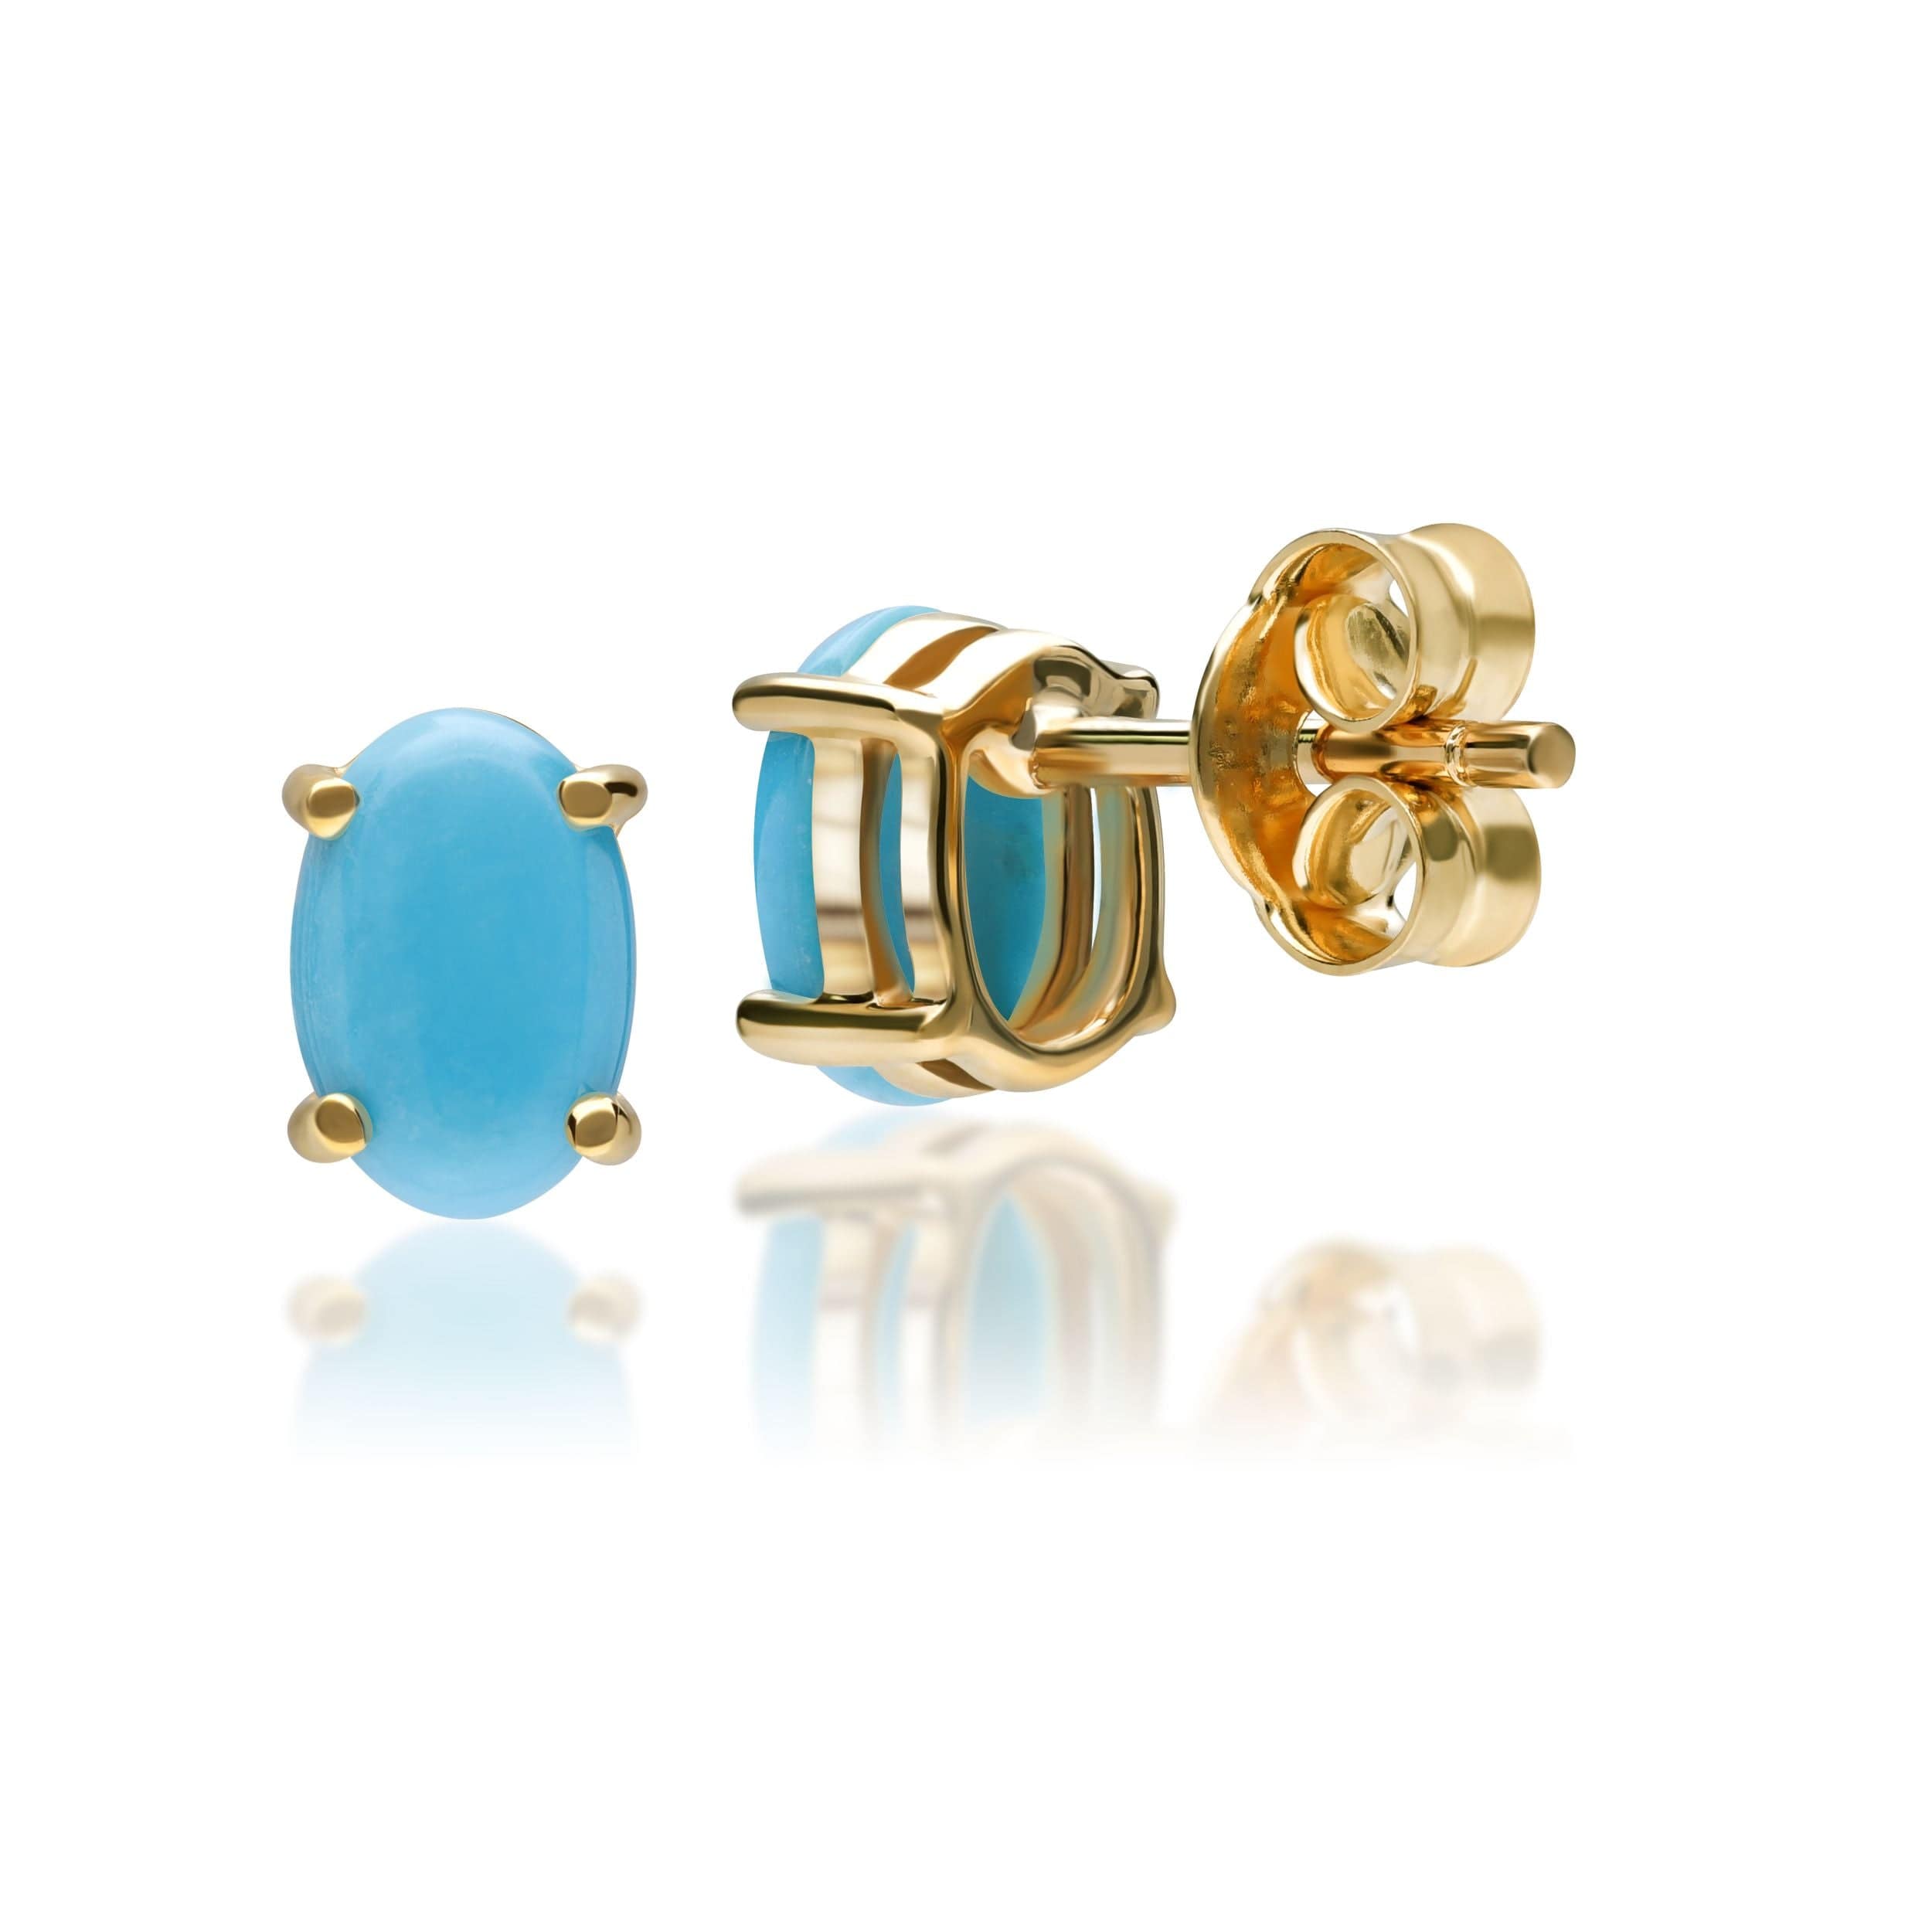 26936 Classic Oval Turquoise Cabochon Stud Earrings in 9ct Yellow Gold 7x5mm 3